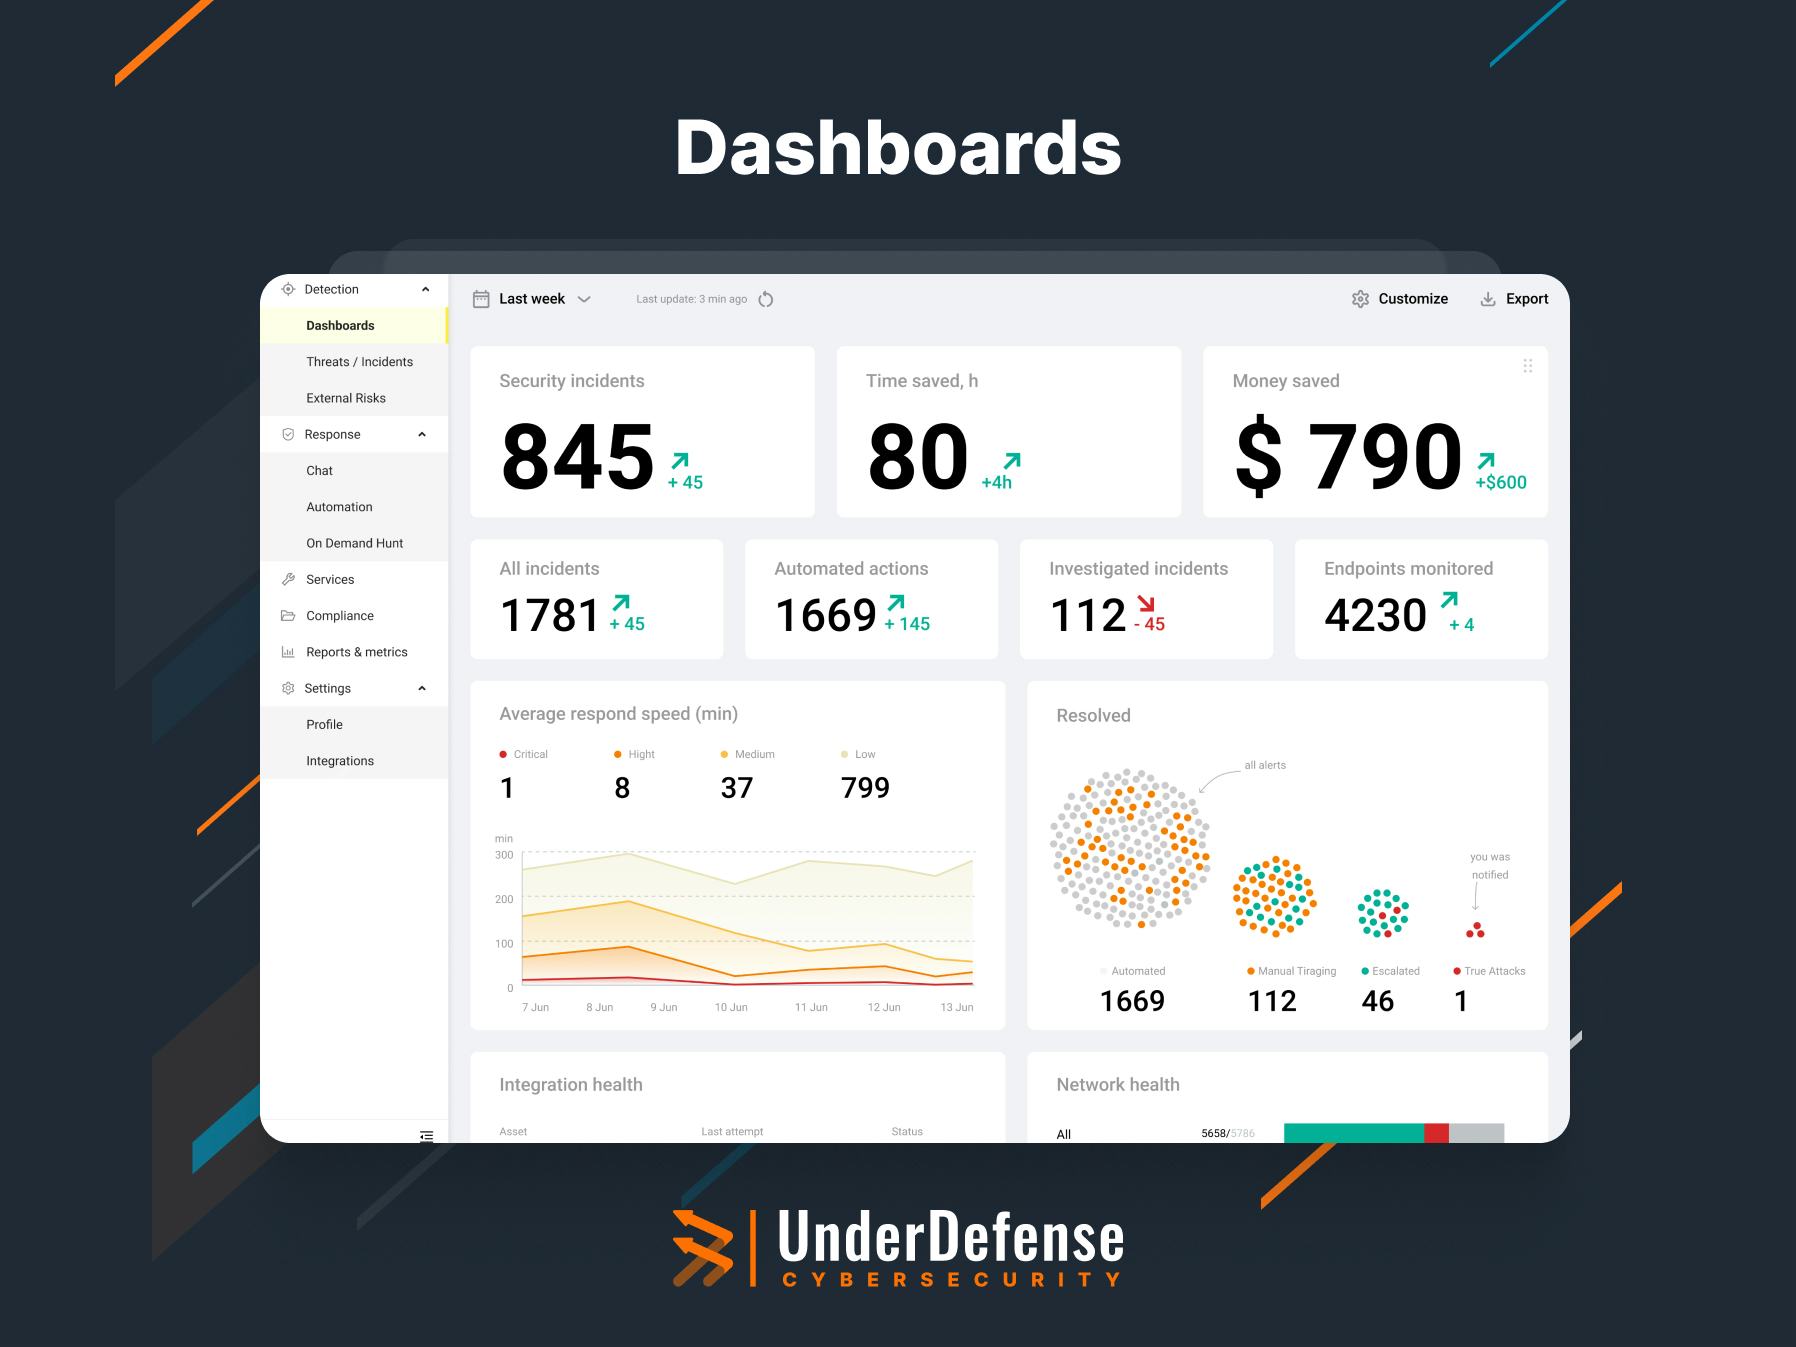 UnderDefense MAXI Software - Evaluate security effectively. Identify vulnerable endpoints swiftly. Strengthen your defenses with actionable insights.